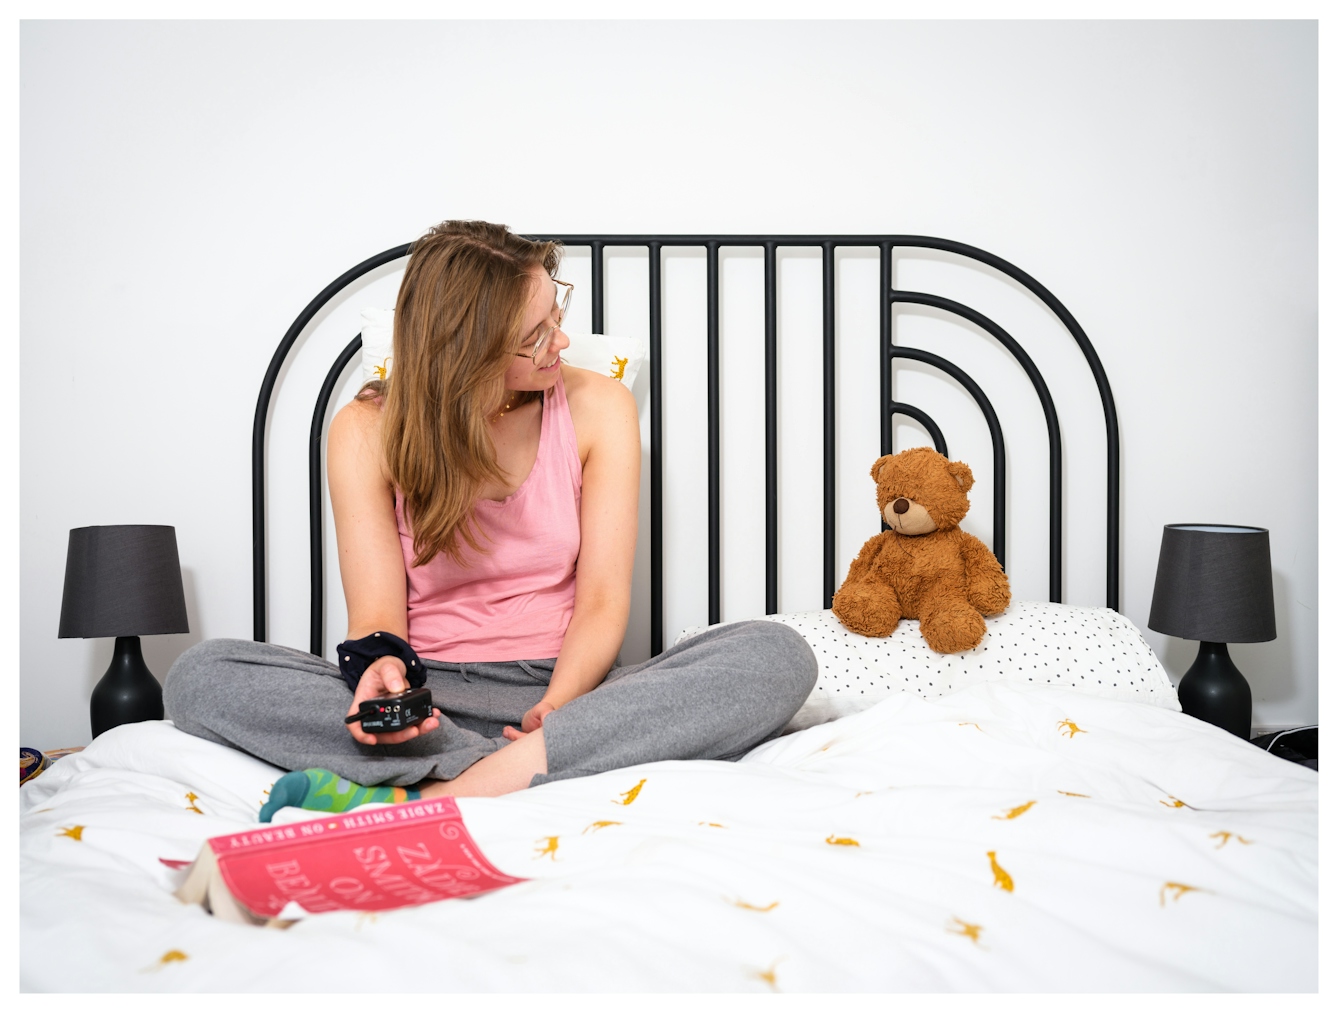 Assisted Self-Portrait of a woman sat cross-legged on her bed smiling across at a teddy bear sat the pillow next to her. In front of her on the bed is an open book, pages down. In her right hand is the remote trigger she's used to capture the image.